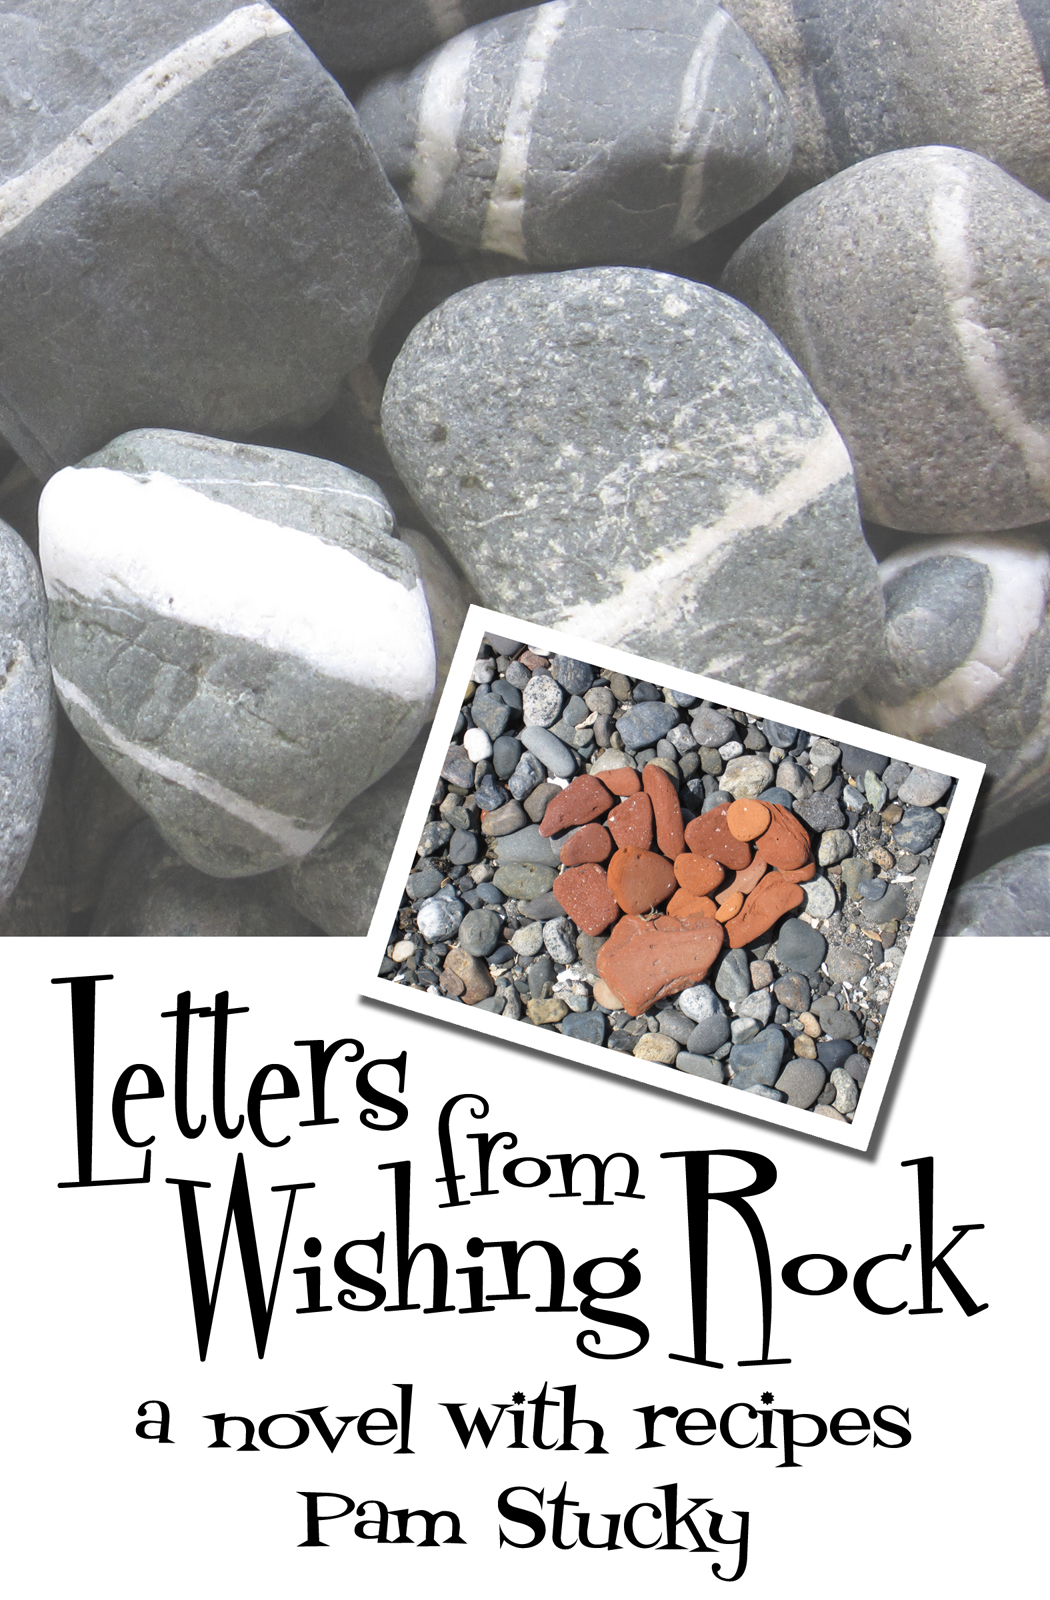 Letters from Wishing Rock - a novel with recipes